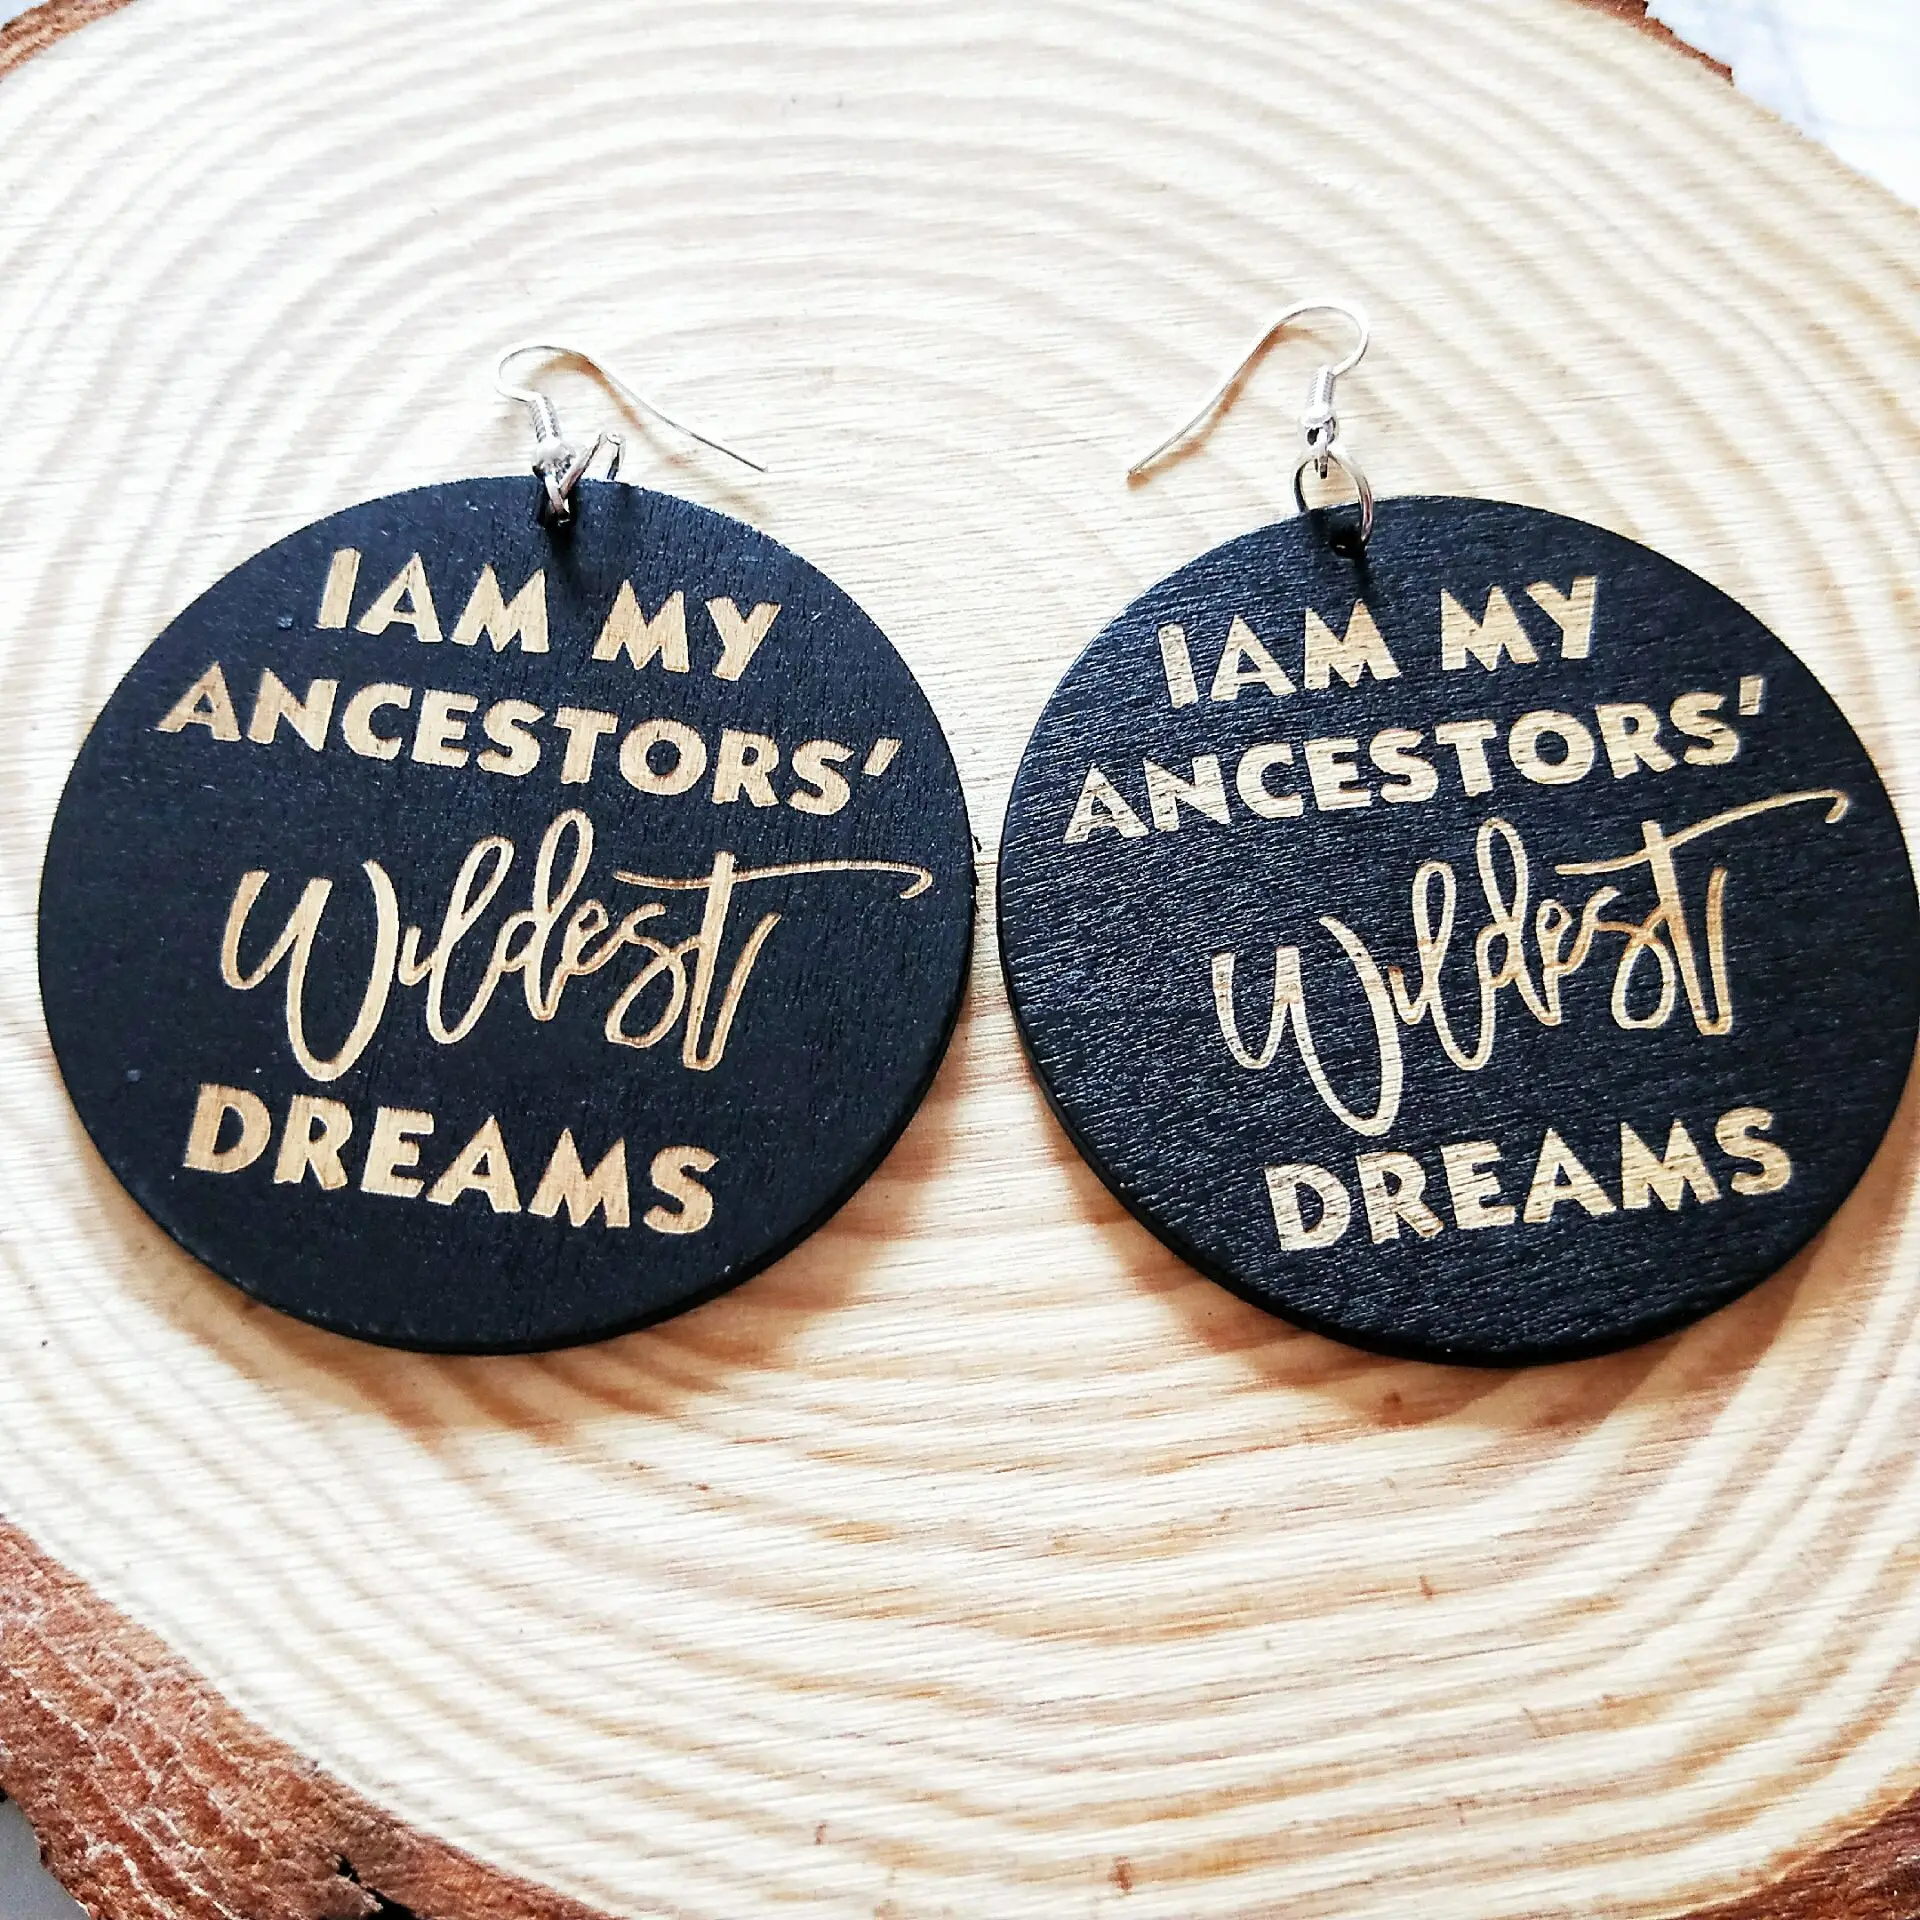 

Bohemia Afro Wood Printing "I AM MY ANCESTORS DREAM " Letters Earrings 6*6cm Round African Wooden Earring